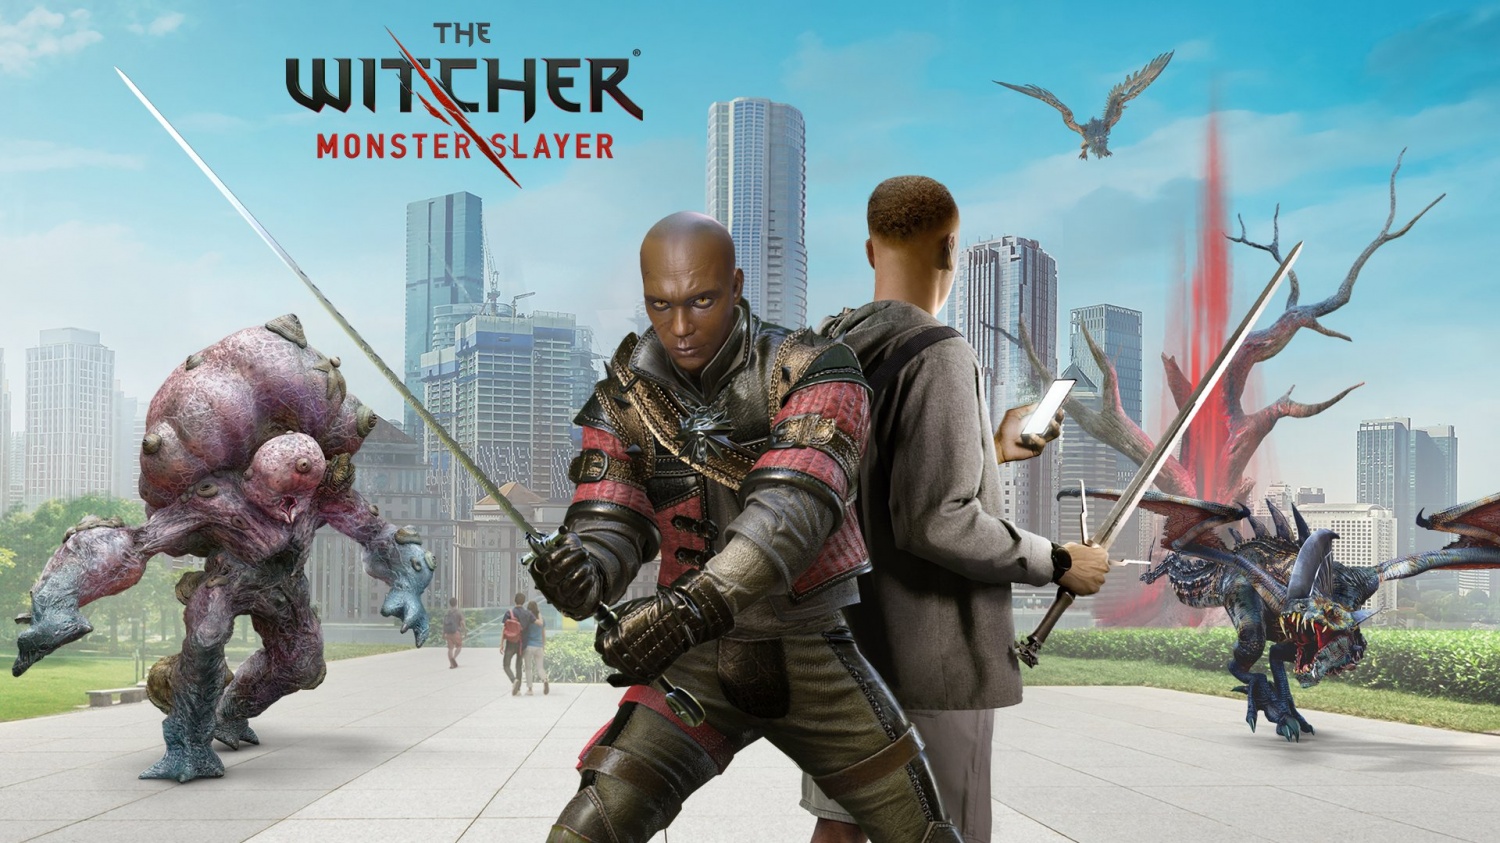 Mobile AR game The Witcher: Monster Slayer shuts down in 2023 - Polygon